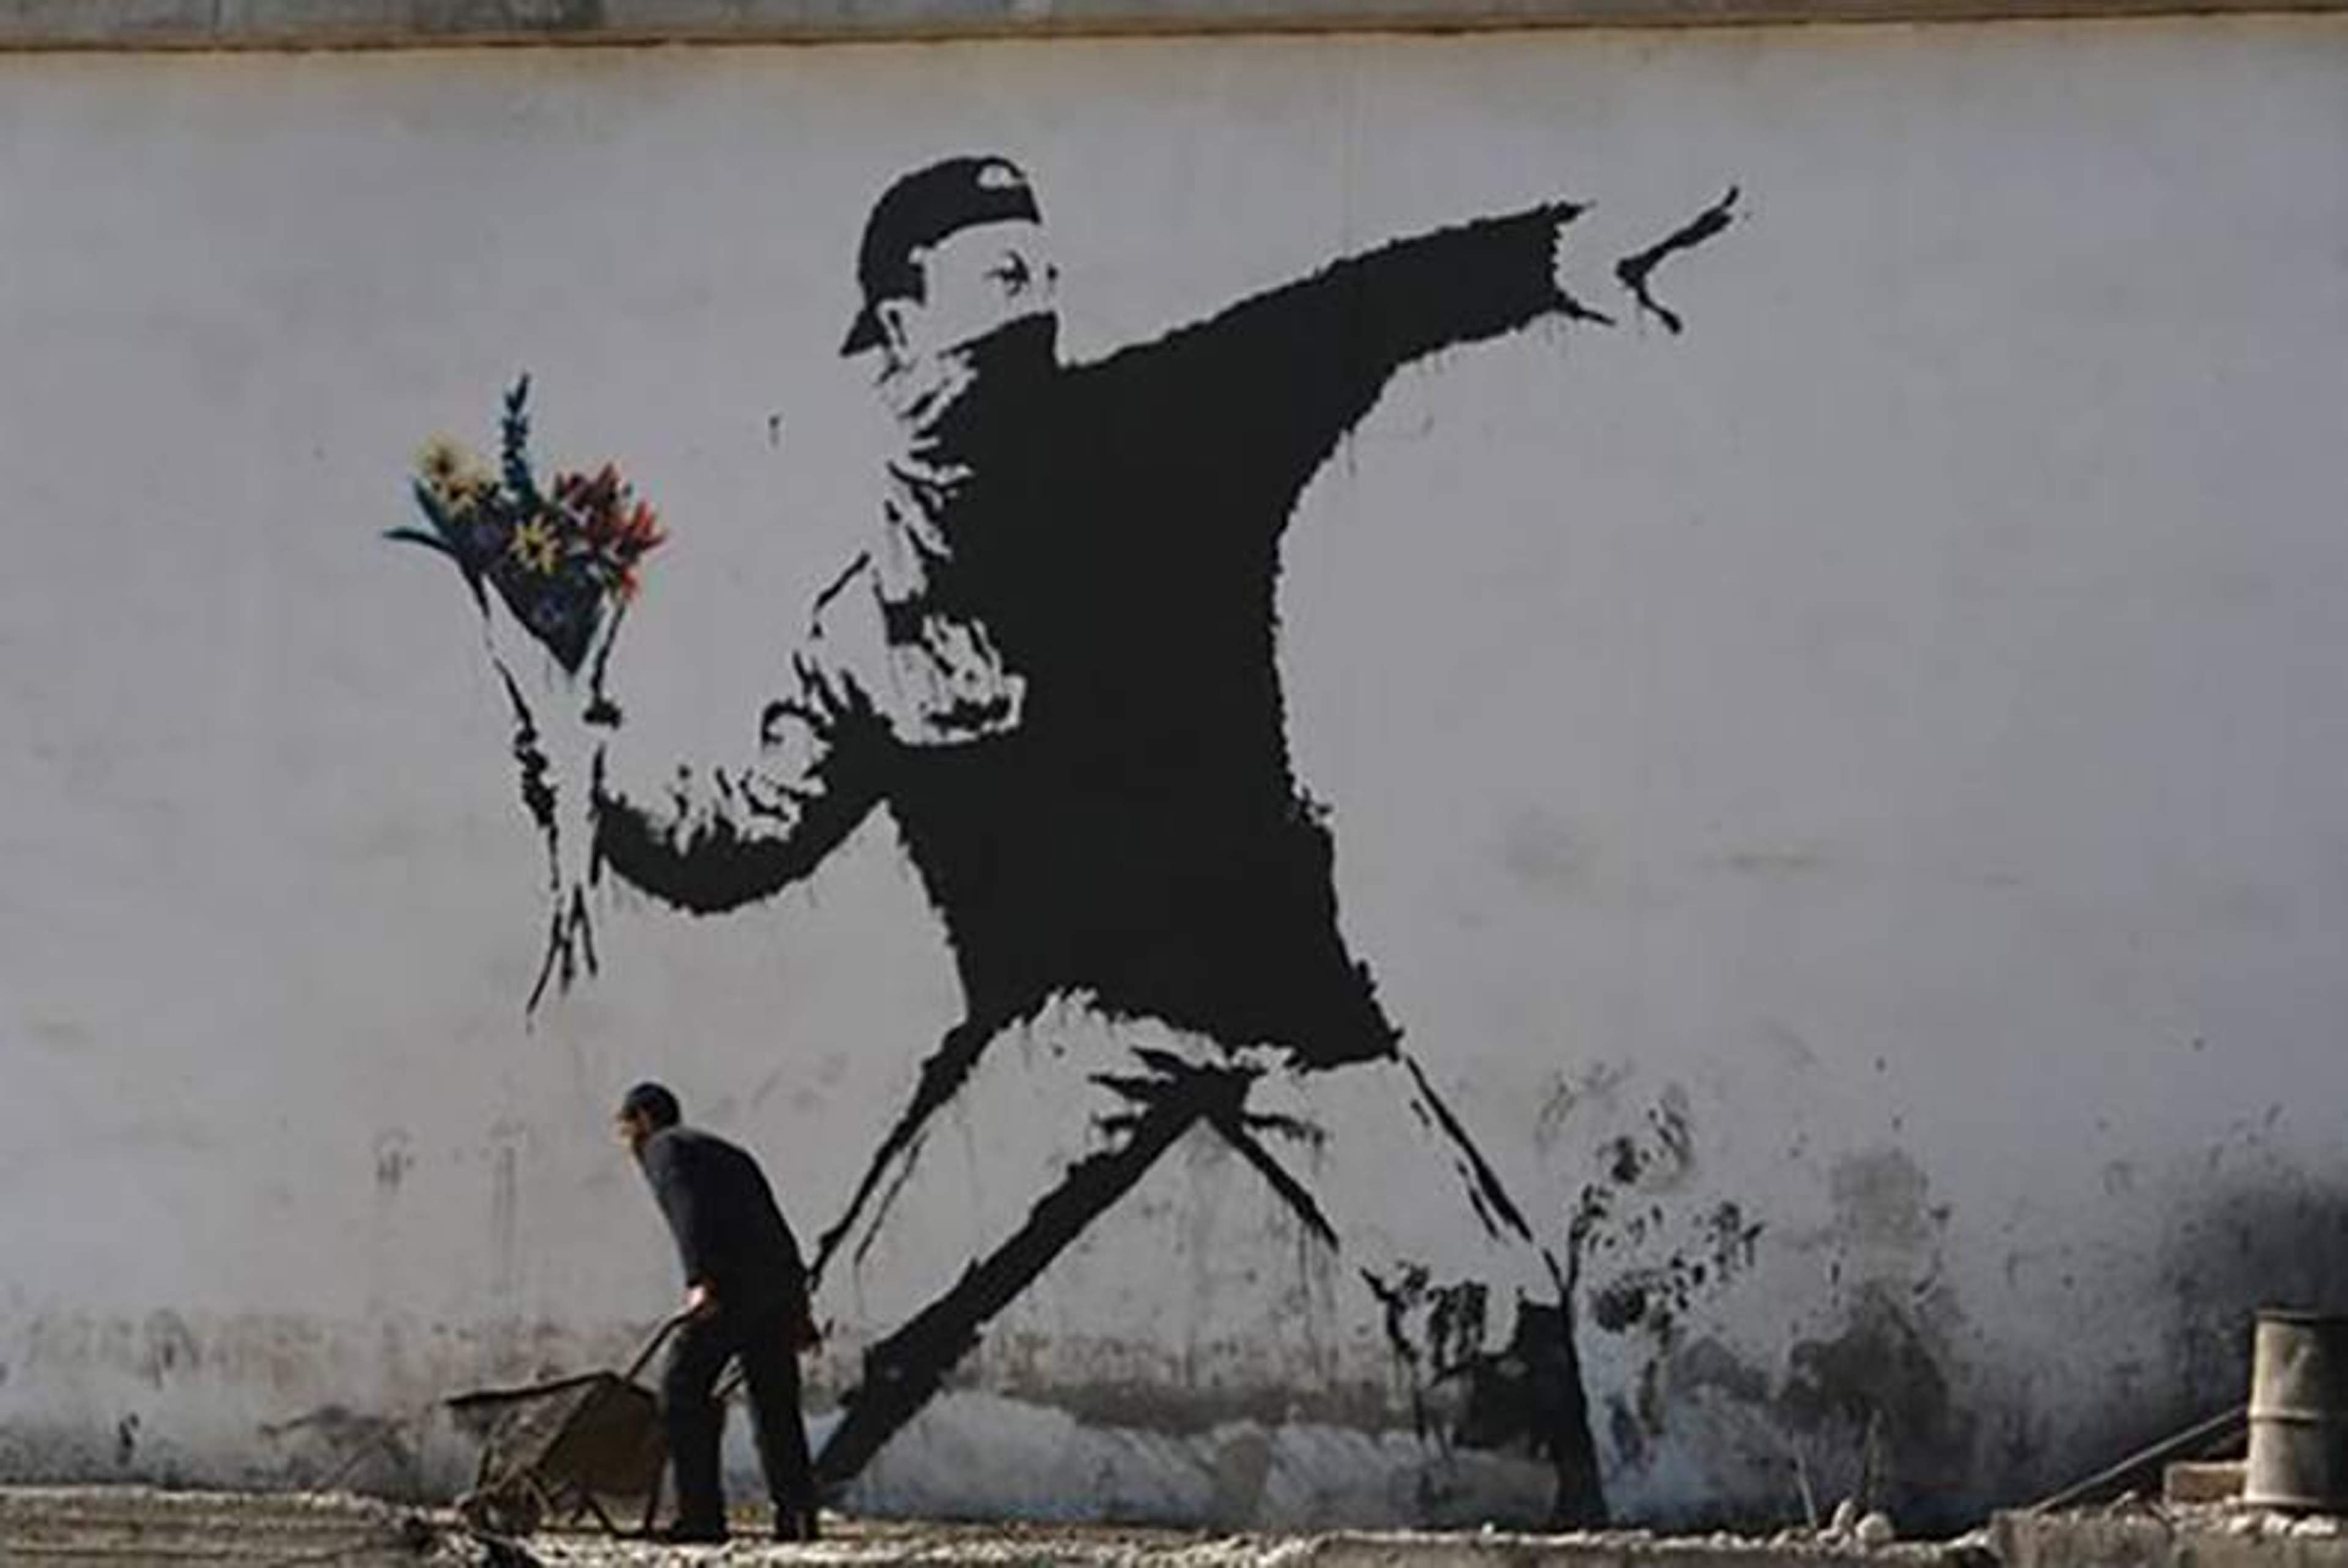 Flower Thrower by Banksy - © (CC) BY-SA 2.0